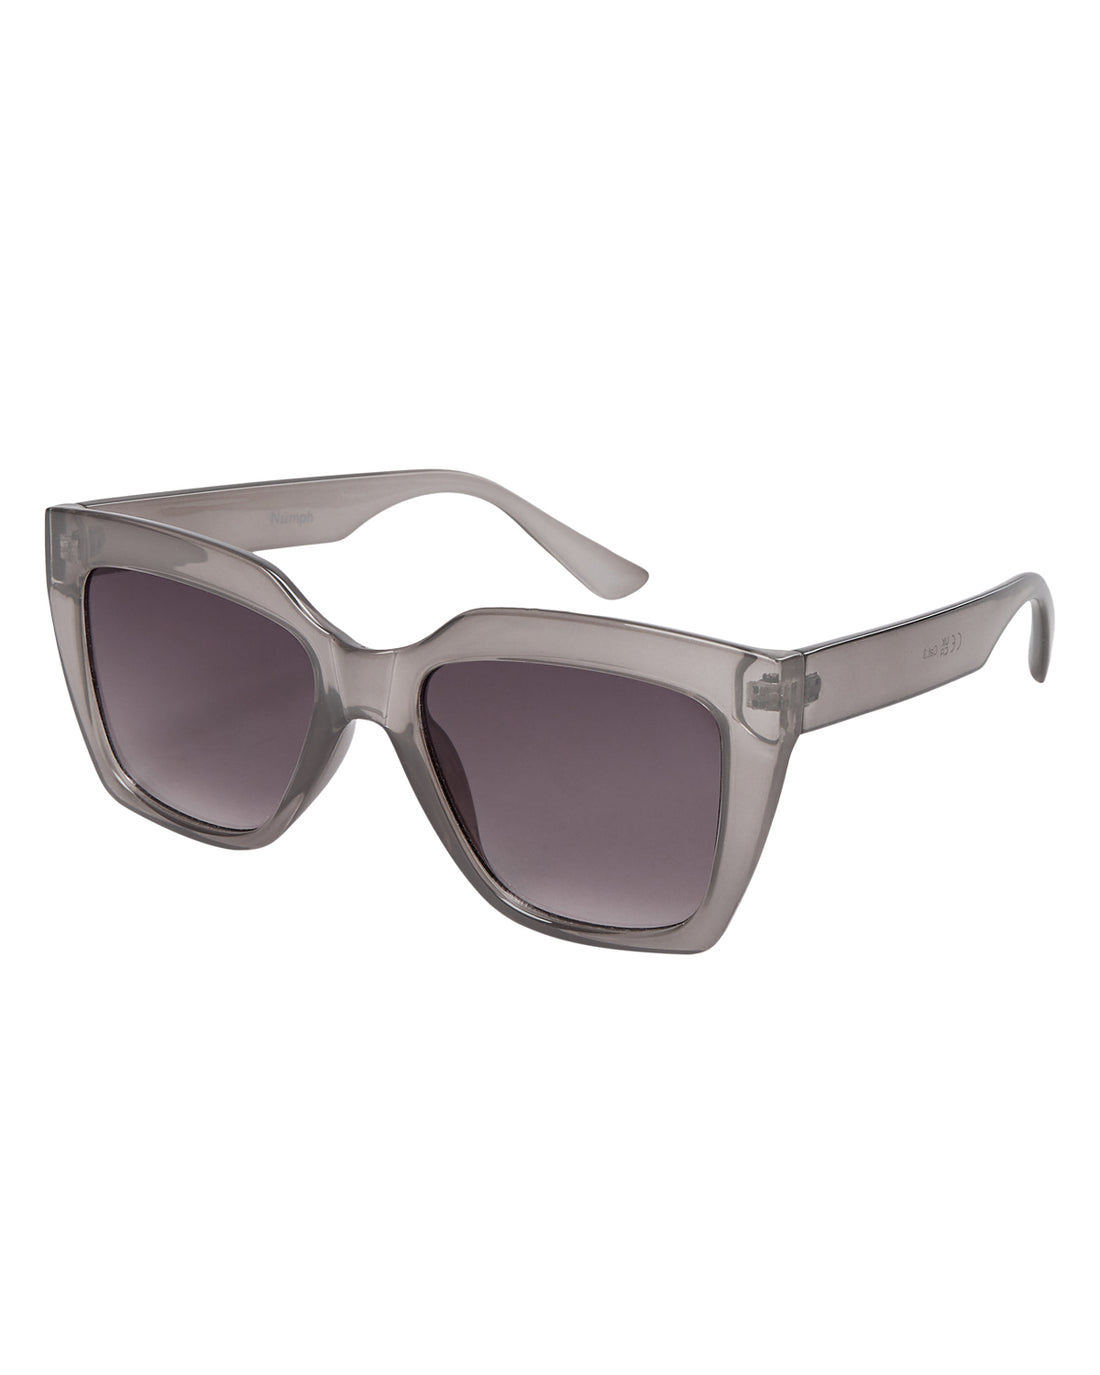 Nuflair Light Grey Sunglasses in Shell with Case